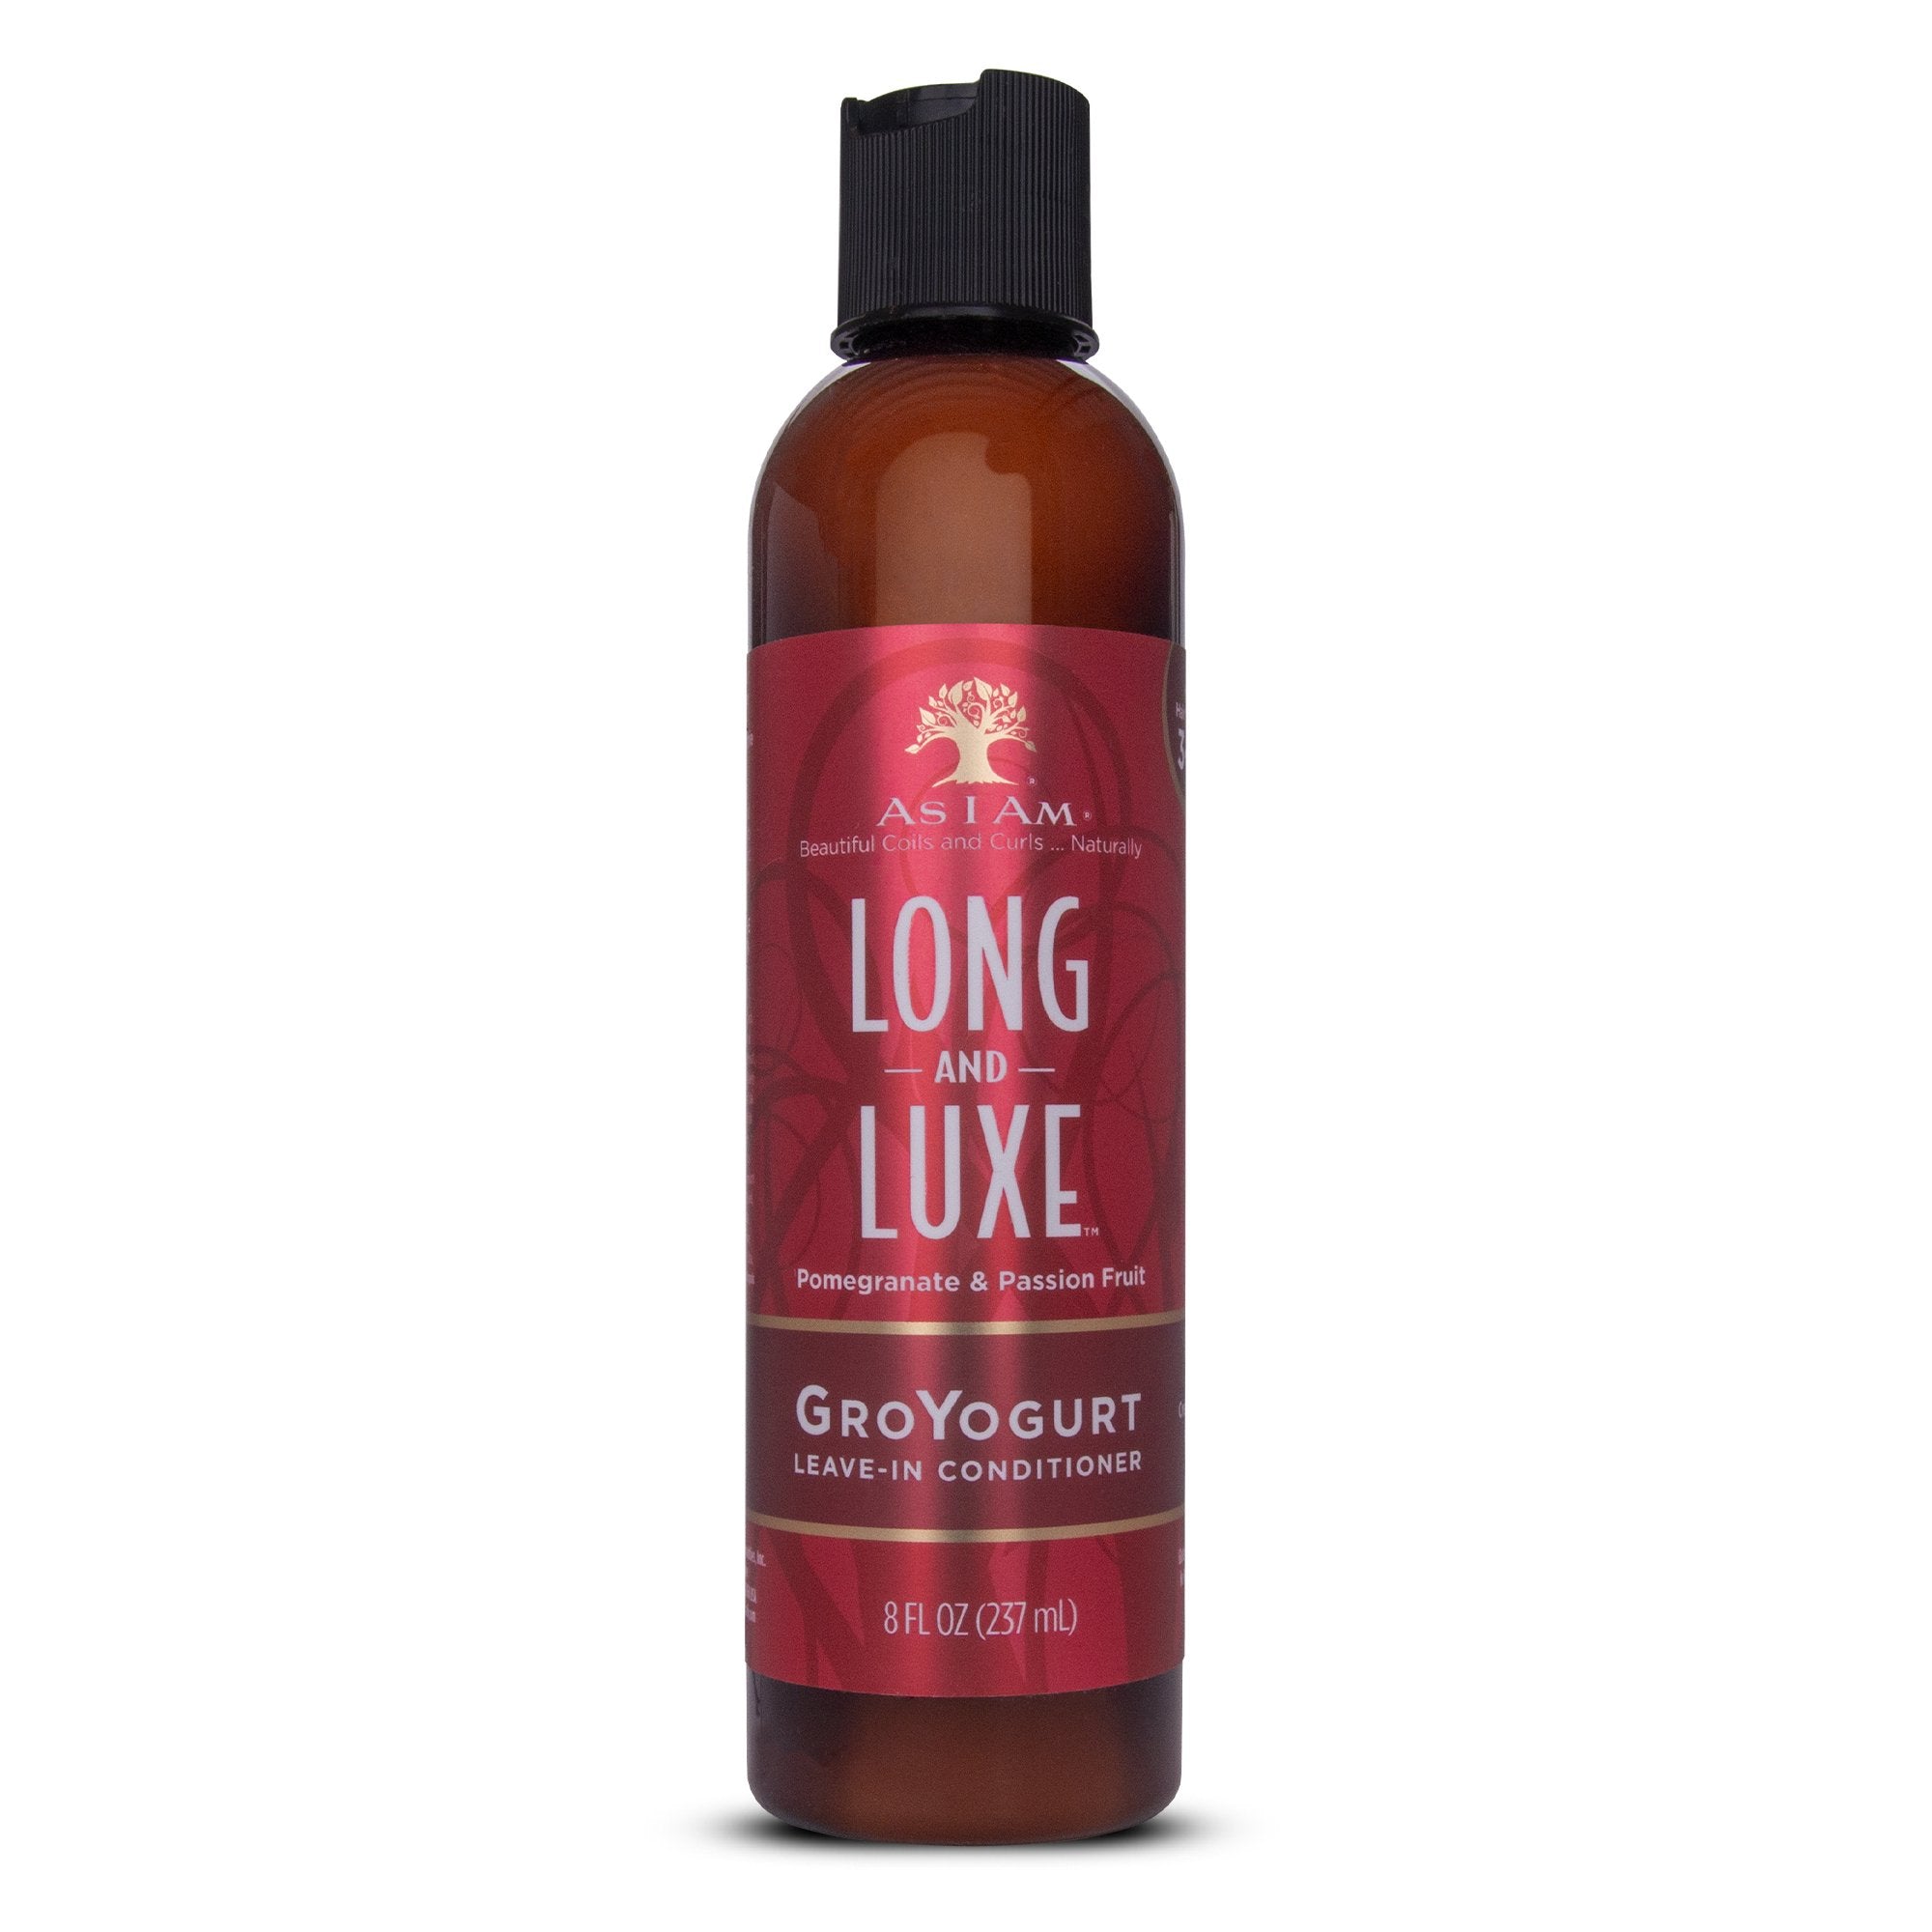 As I Am Long & Luxe Groyogurt Leave-In Conditioner